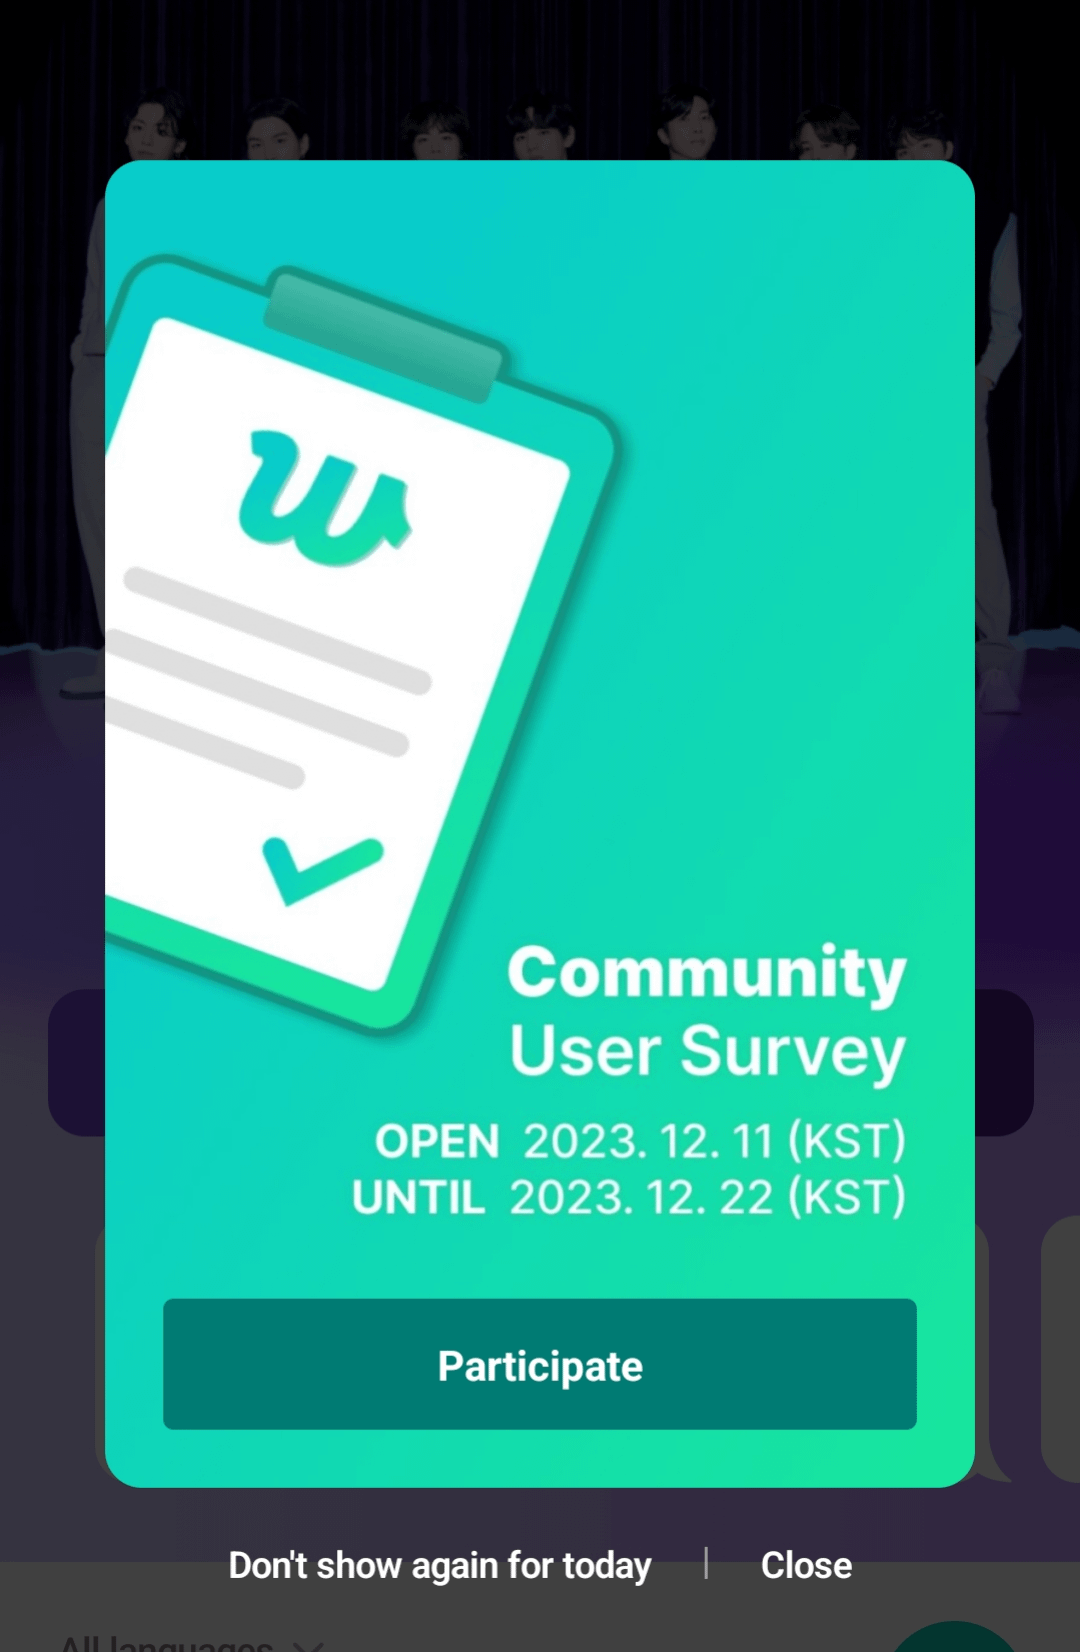 231212 FYI Weverse has posted a Community User Survey (open until 2023.12.22, launches upon opening app and entering artist zone)